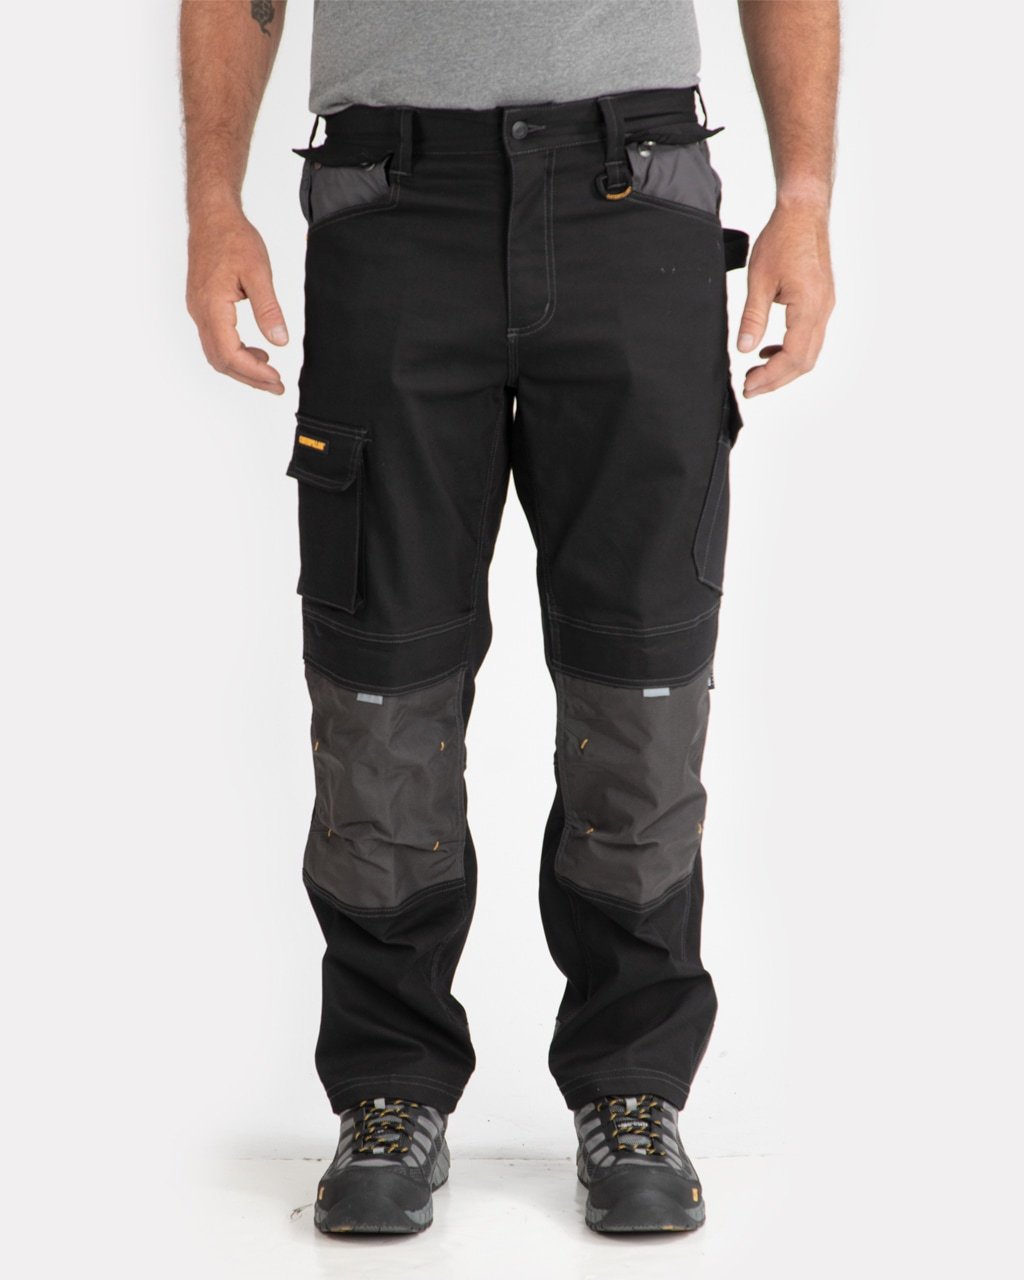 CAT Men's H2O Defender Pant - Work World - Workwear, Work Boots, Safety Gear